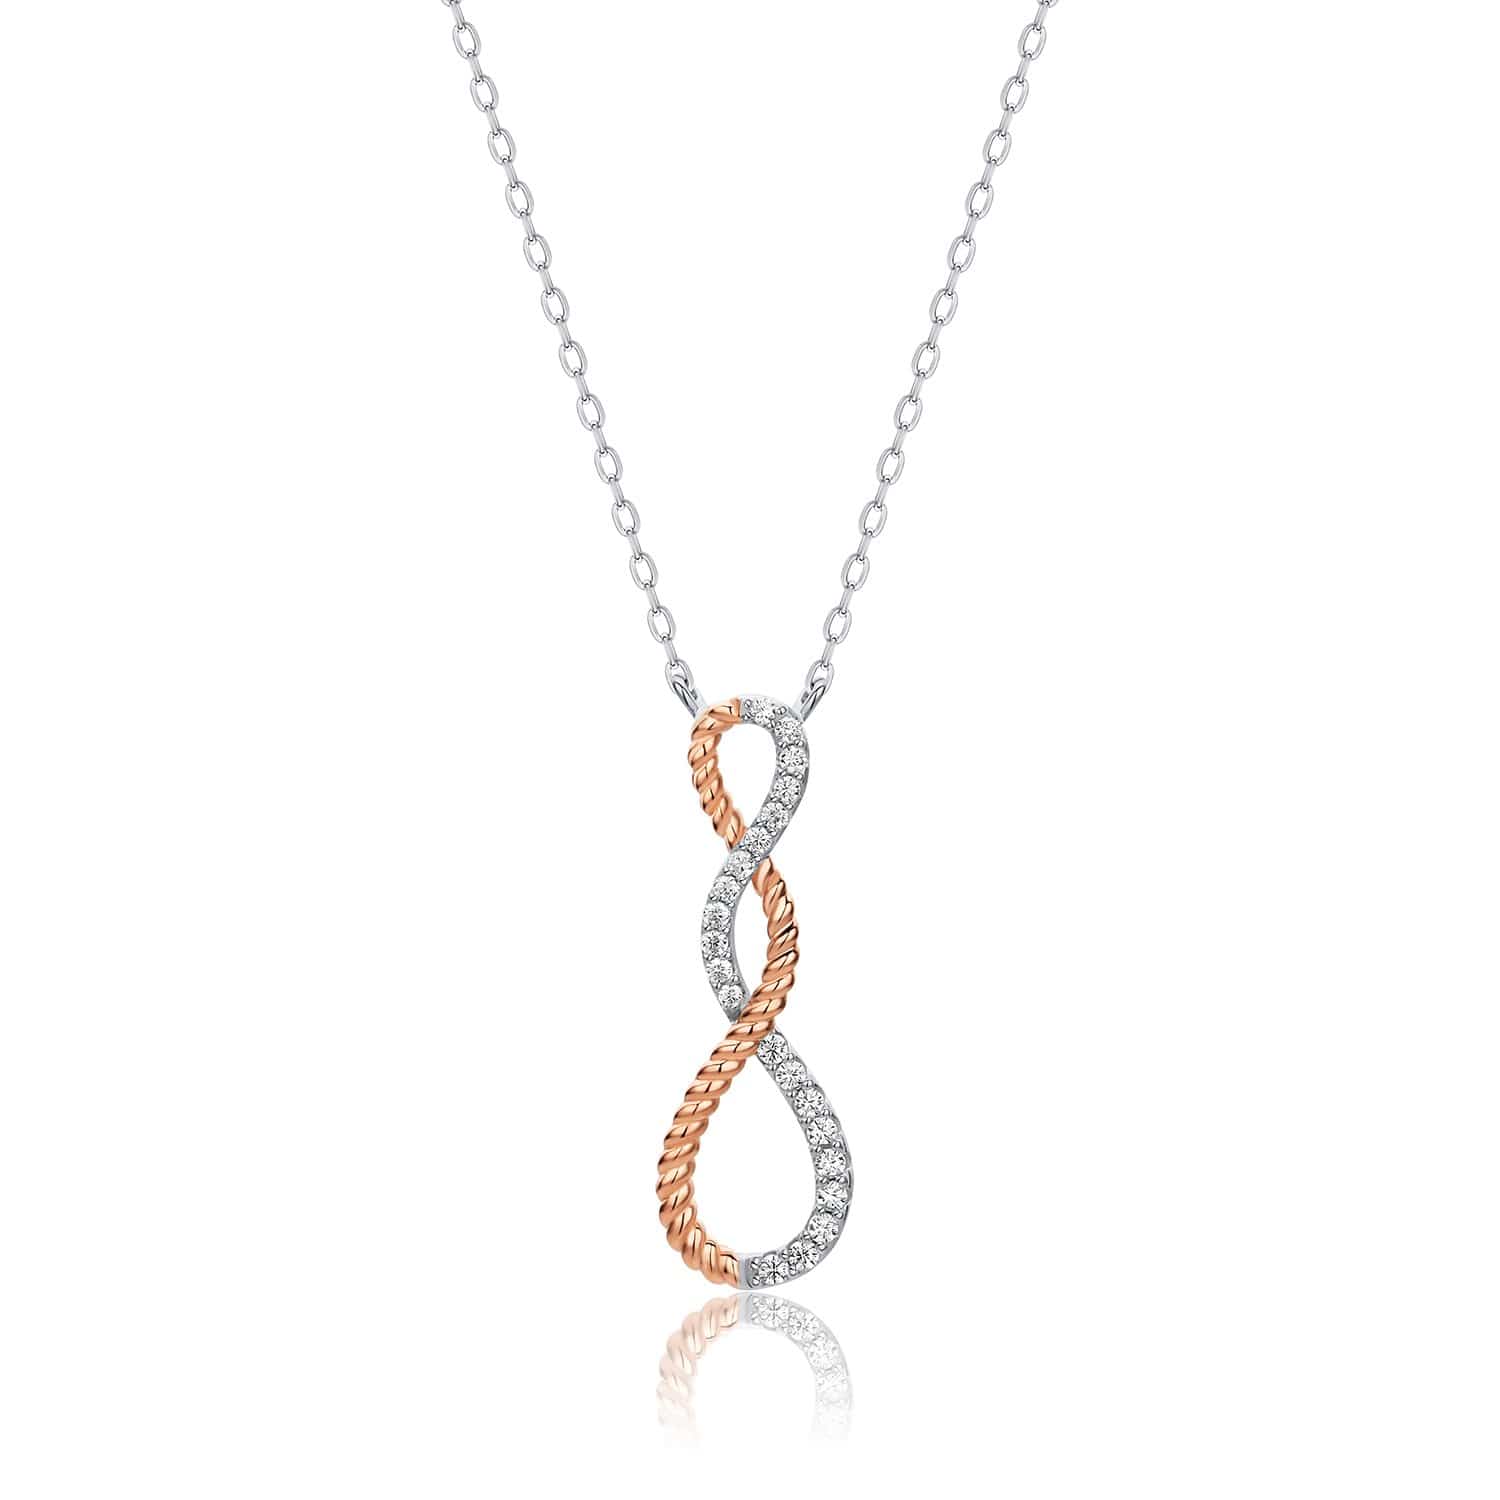 Lynora Jewellery Necklace 18" adj / Mixed Metals / Clear Rope Necklace SILVER AND ROSE GOLD MIX